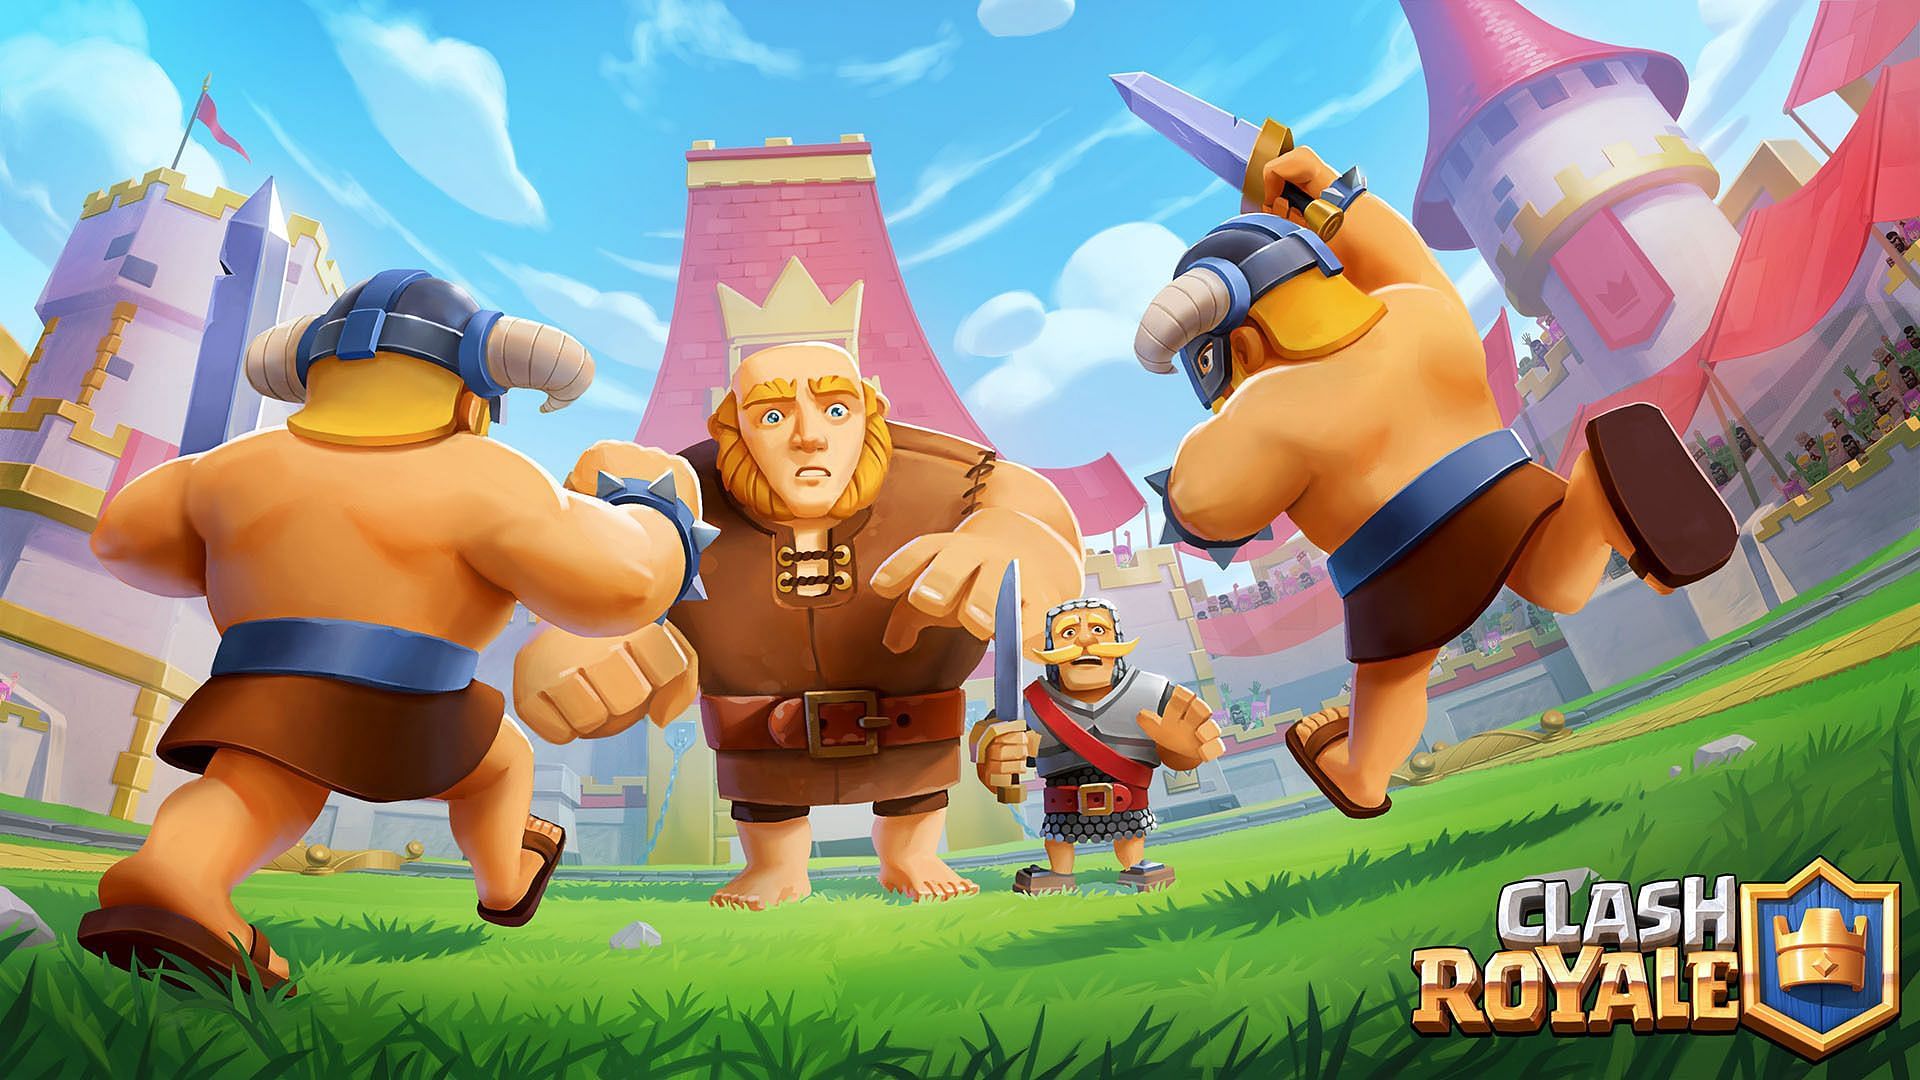 Giant, Knight, and Elite Barbarians (Image via Supercell)